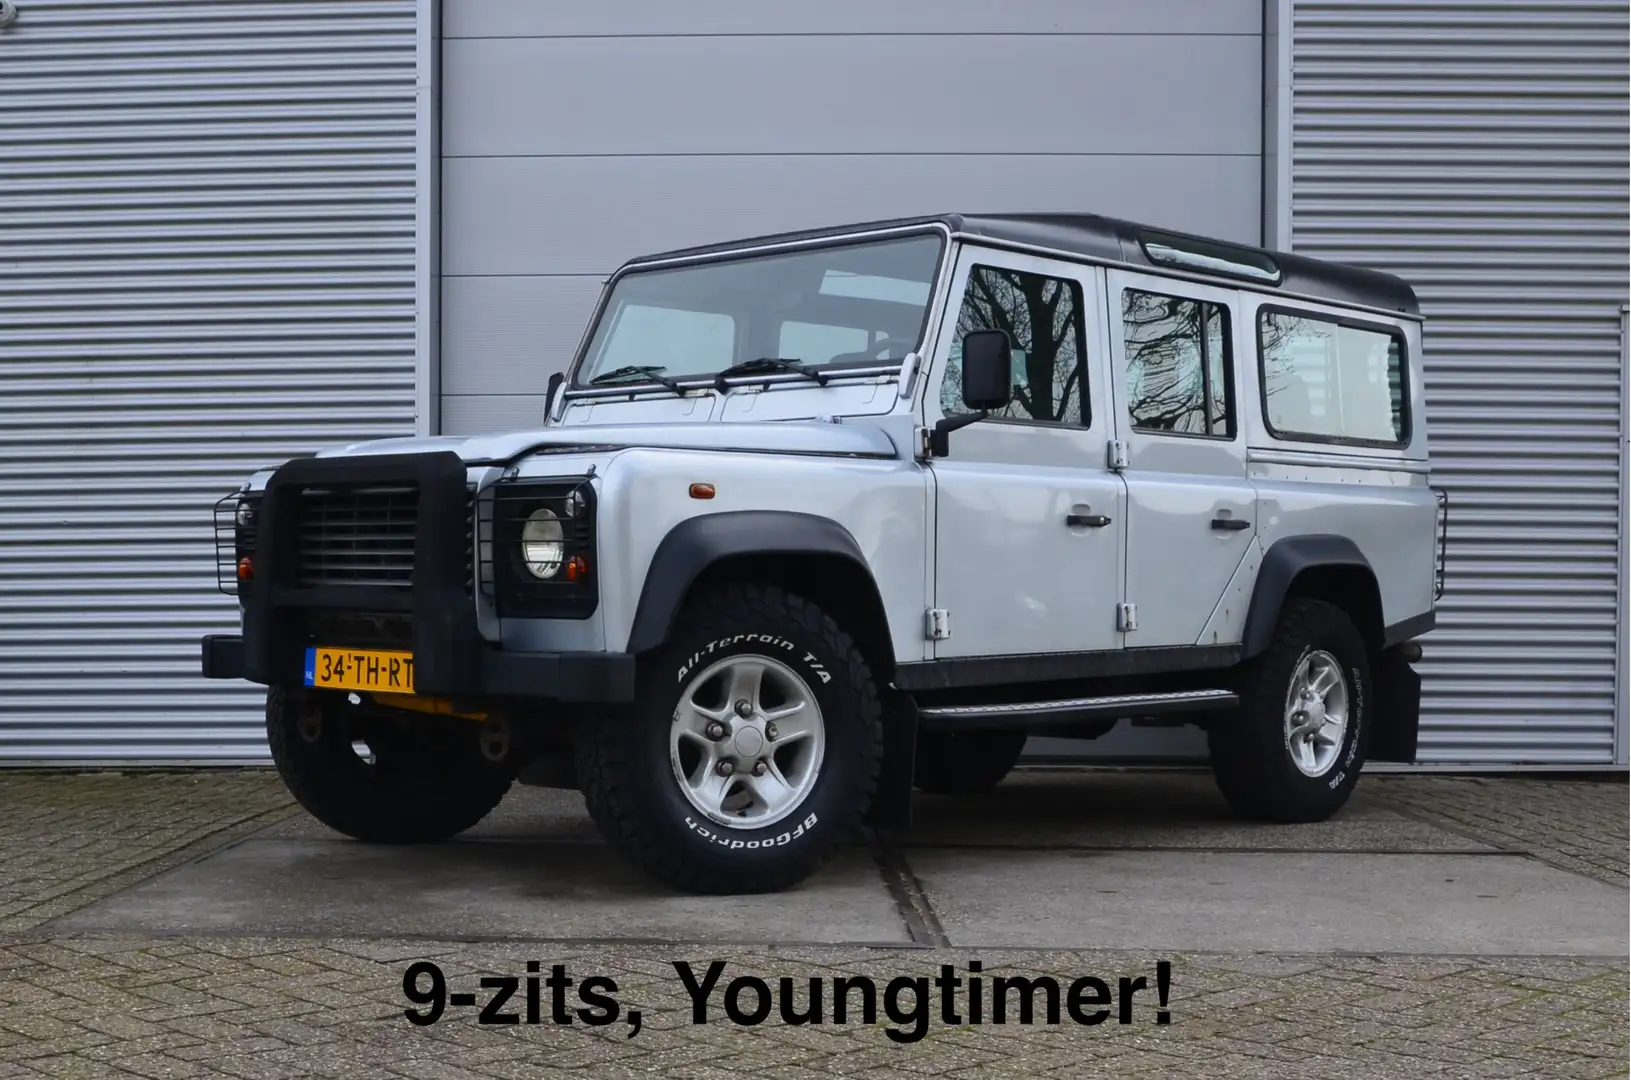 Land Rover Defender 2.5 TD5 110 SW XTech 9-zits, Youngtimer! fin. 542, Gris - 1